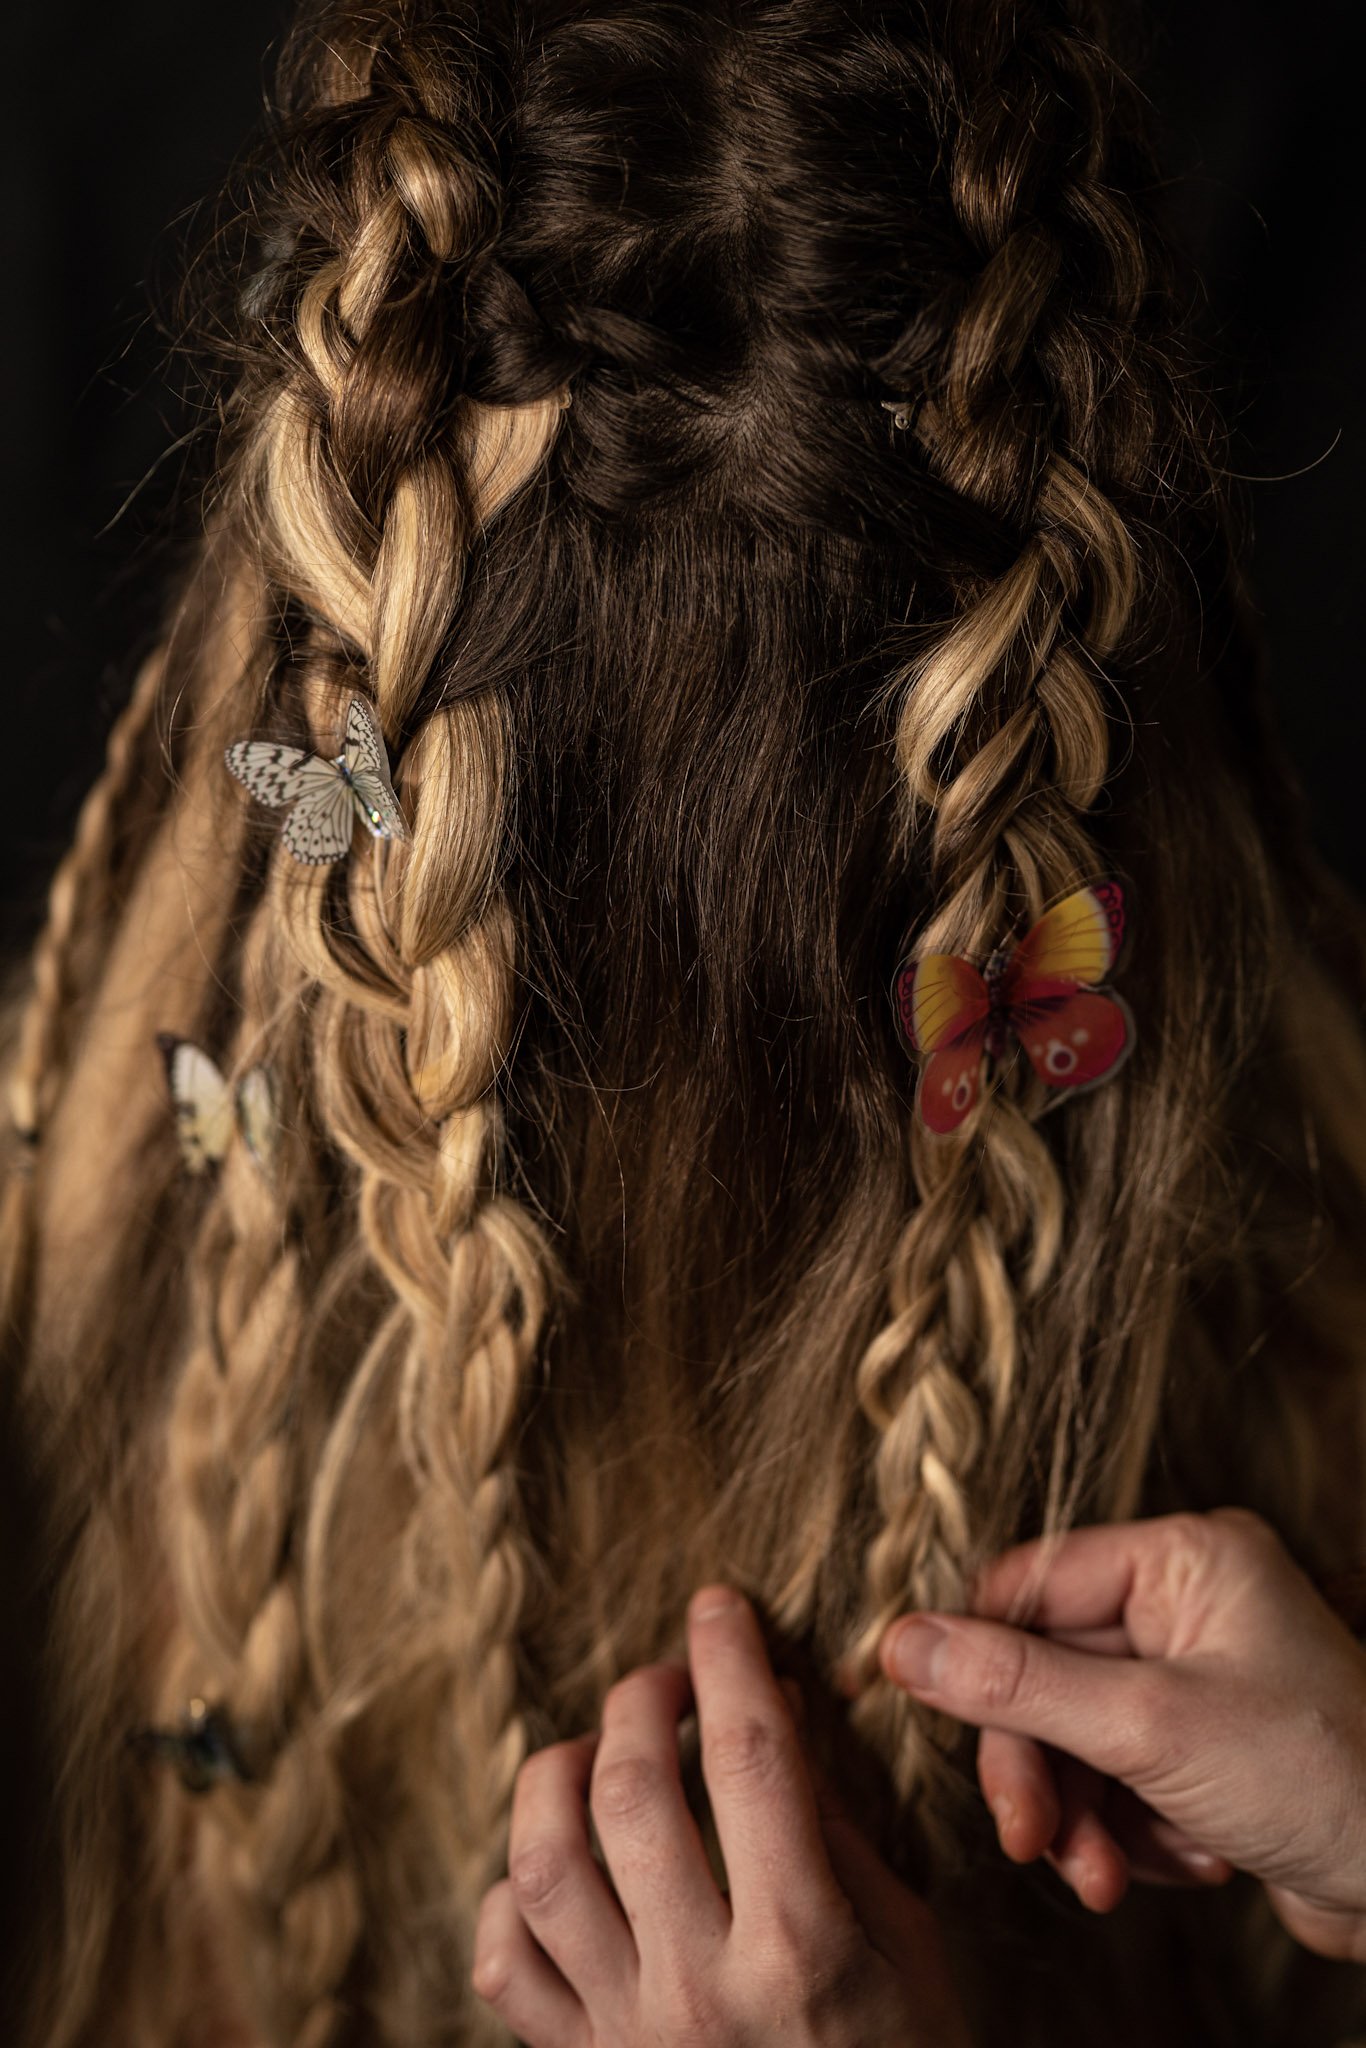 Braided hair with small decorative butterflies to represent element earth